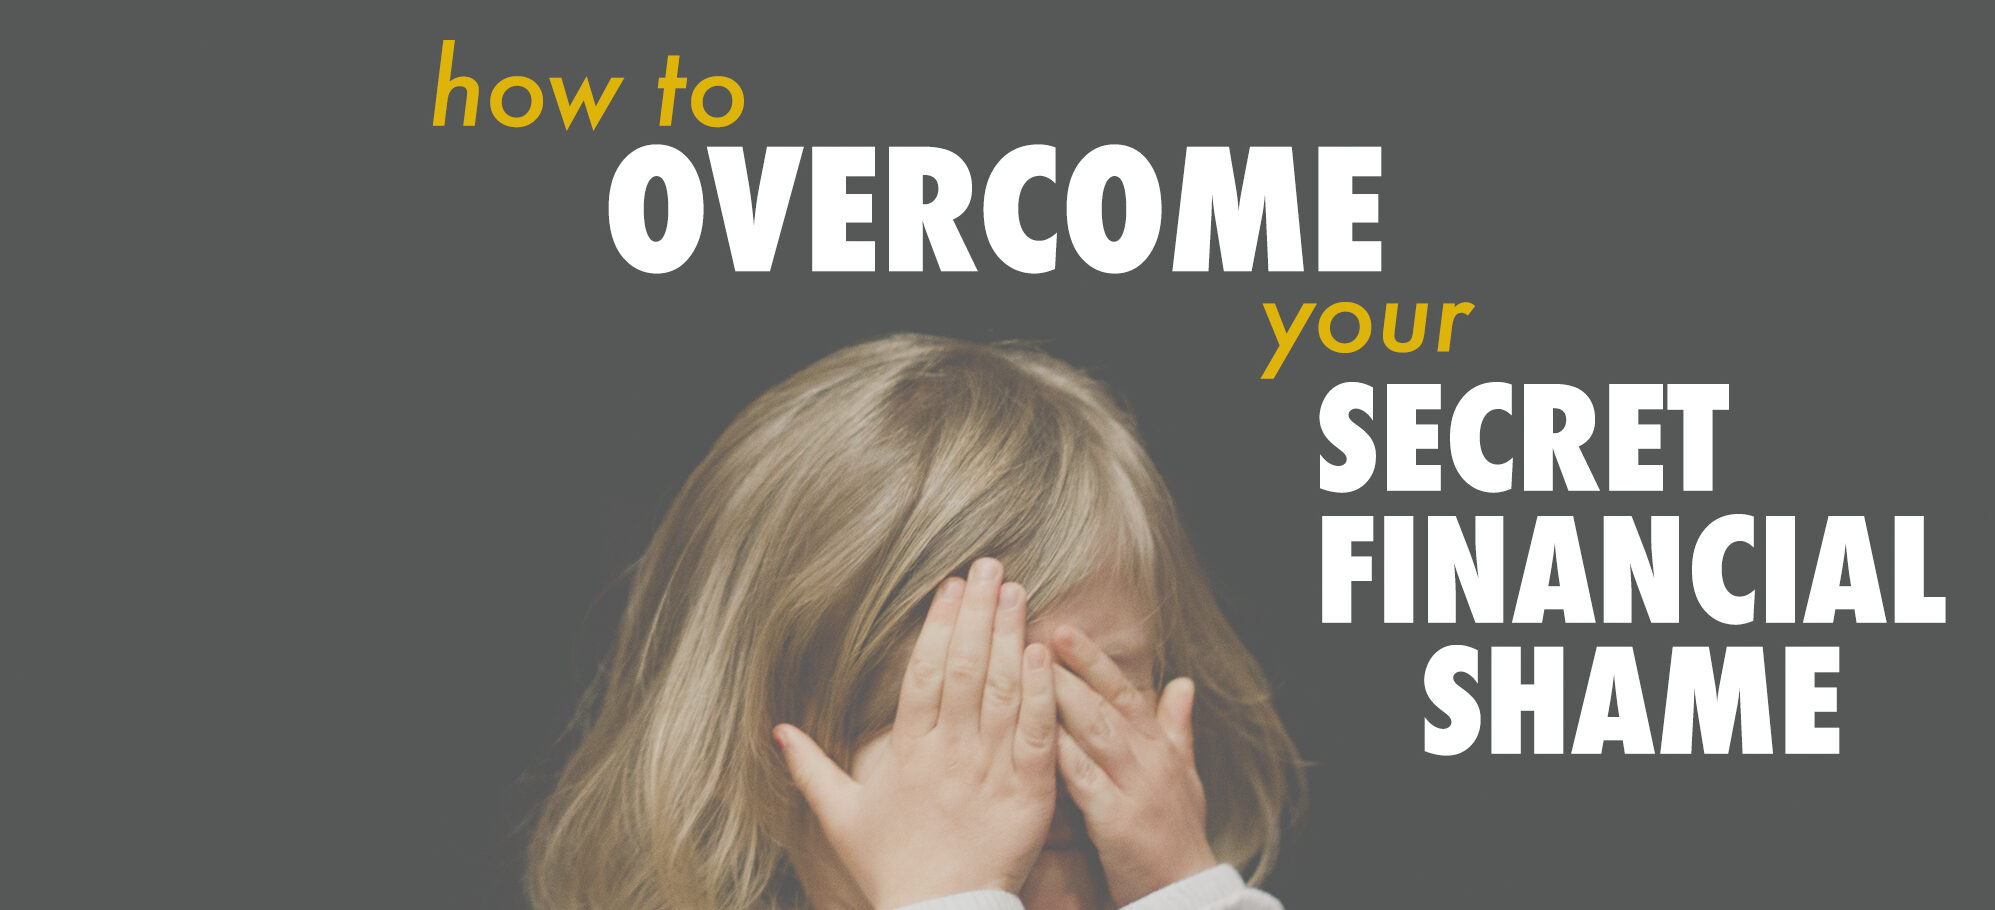 How to Overcome Your Secret Financial Shame